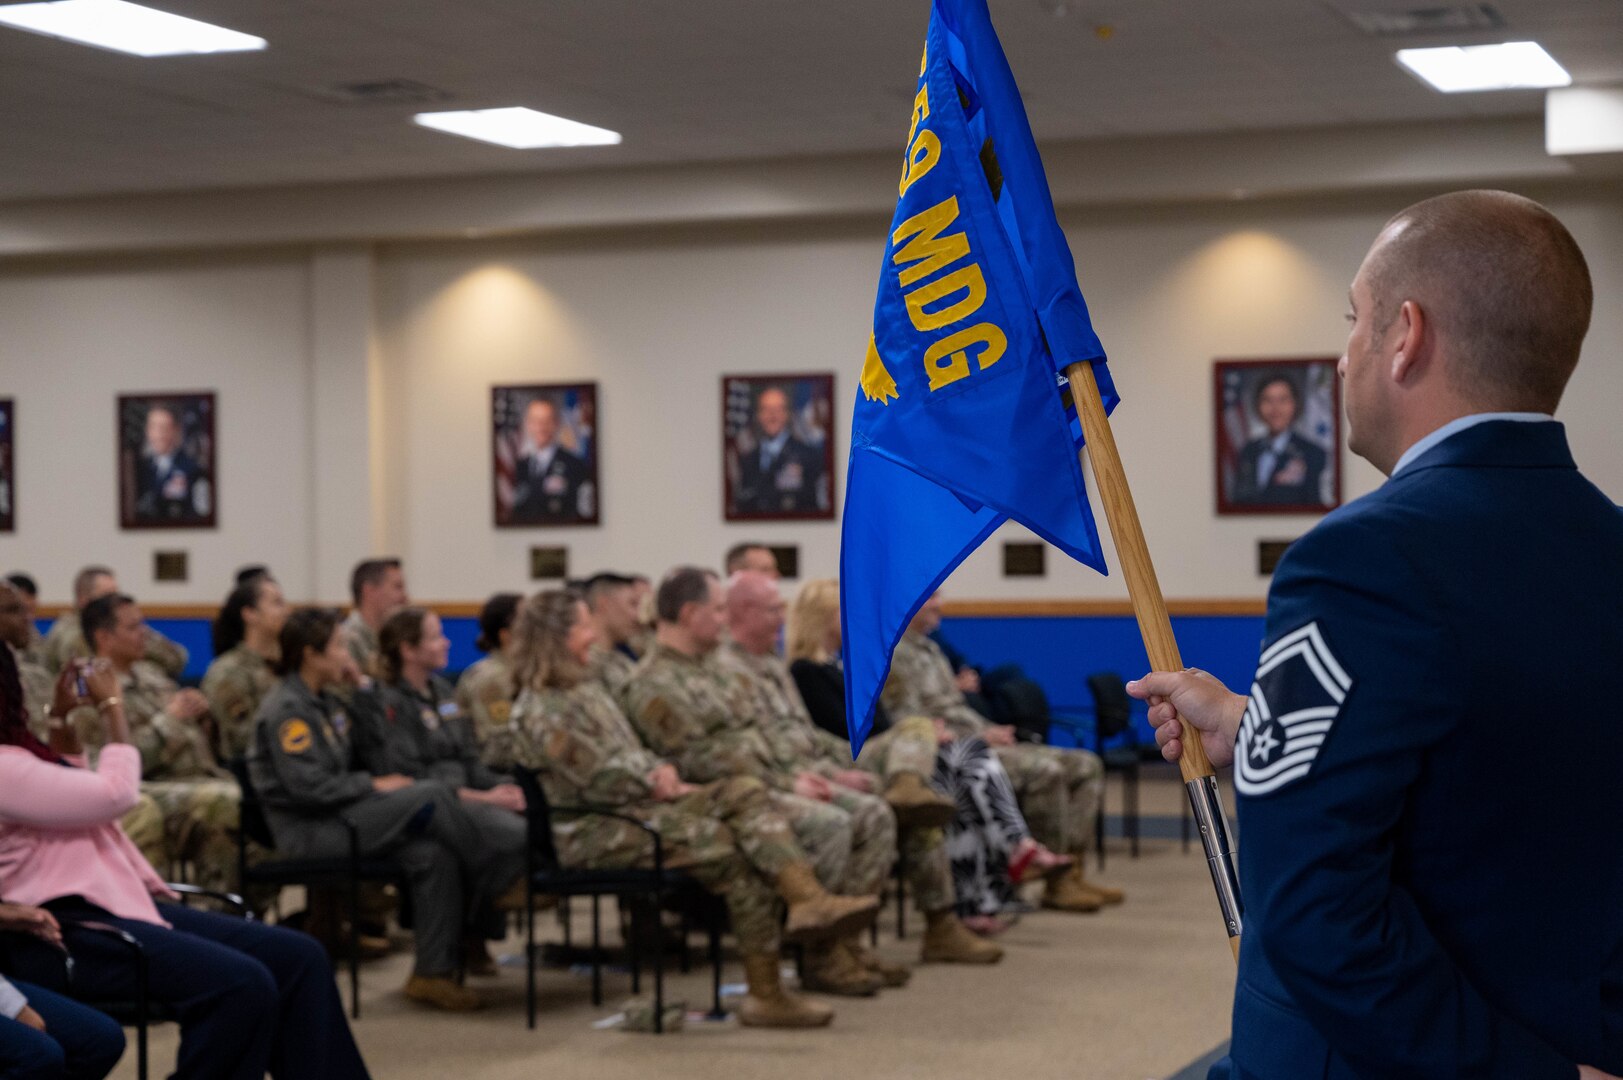 Senior Master Sgt. Jonathan Eckley, 559th Trainee Health Squadron senior enlisted leader, holds the guidon as Lt. Col. Lena Williams Cox, newly appointed commander of the 559th THLS addresses attendees during the change of command ceremony at Joint Base San Antonio- Lackland, Texas.